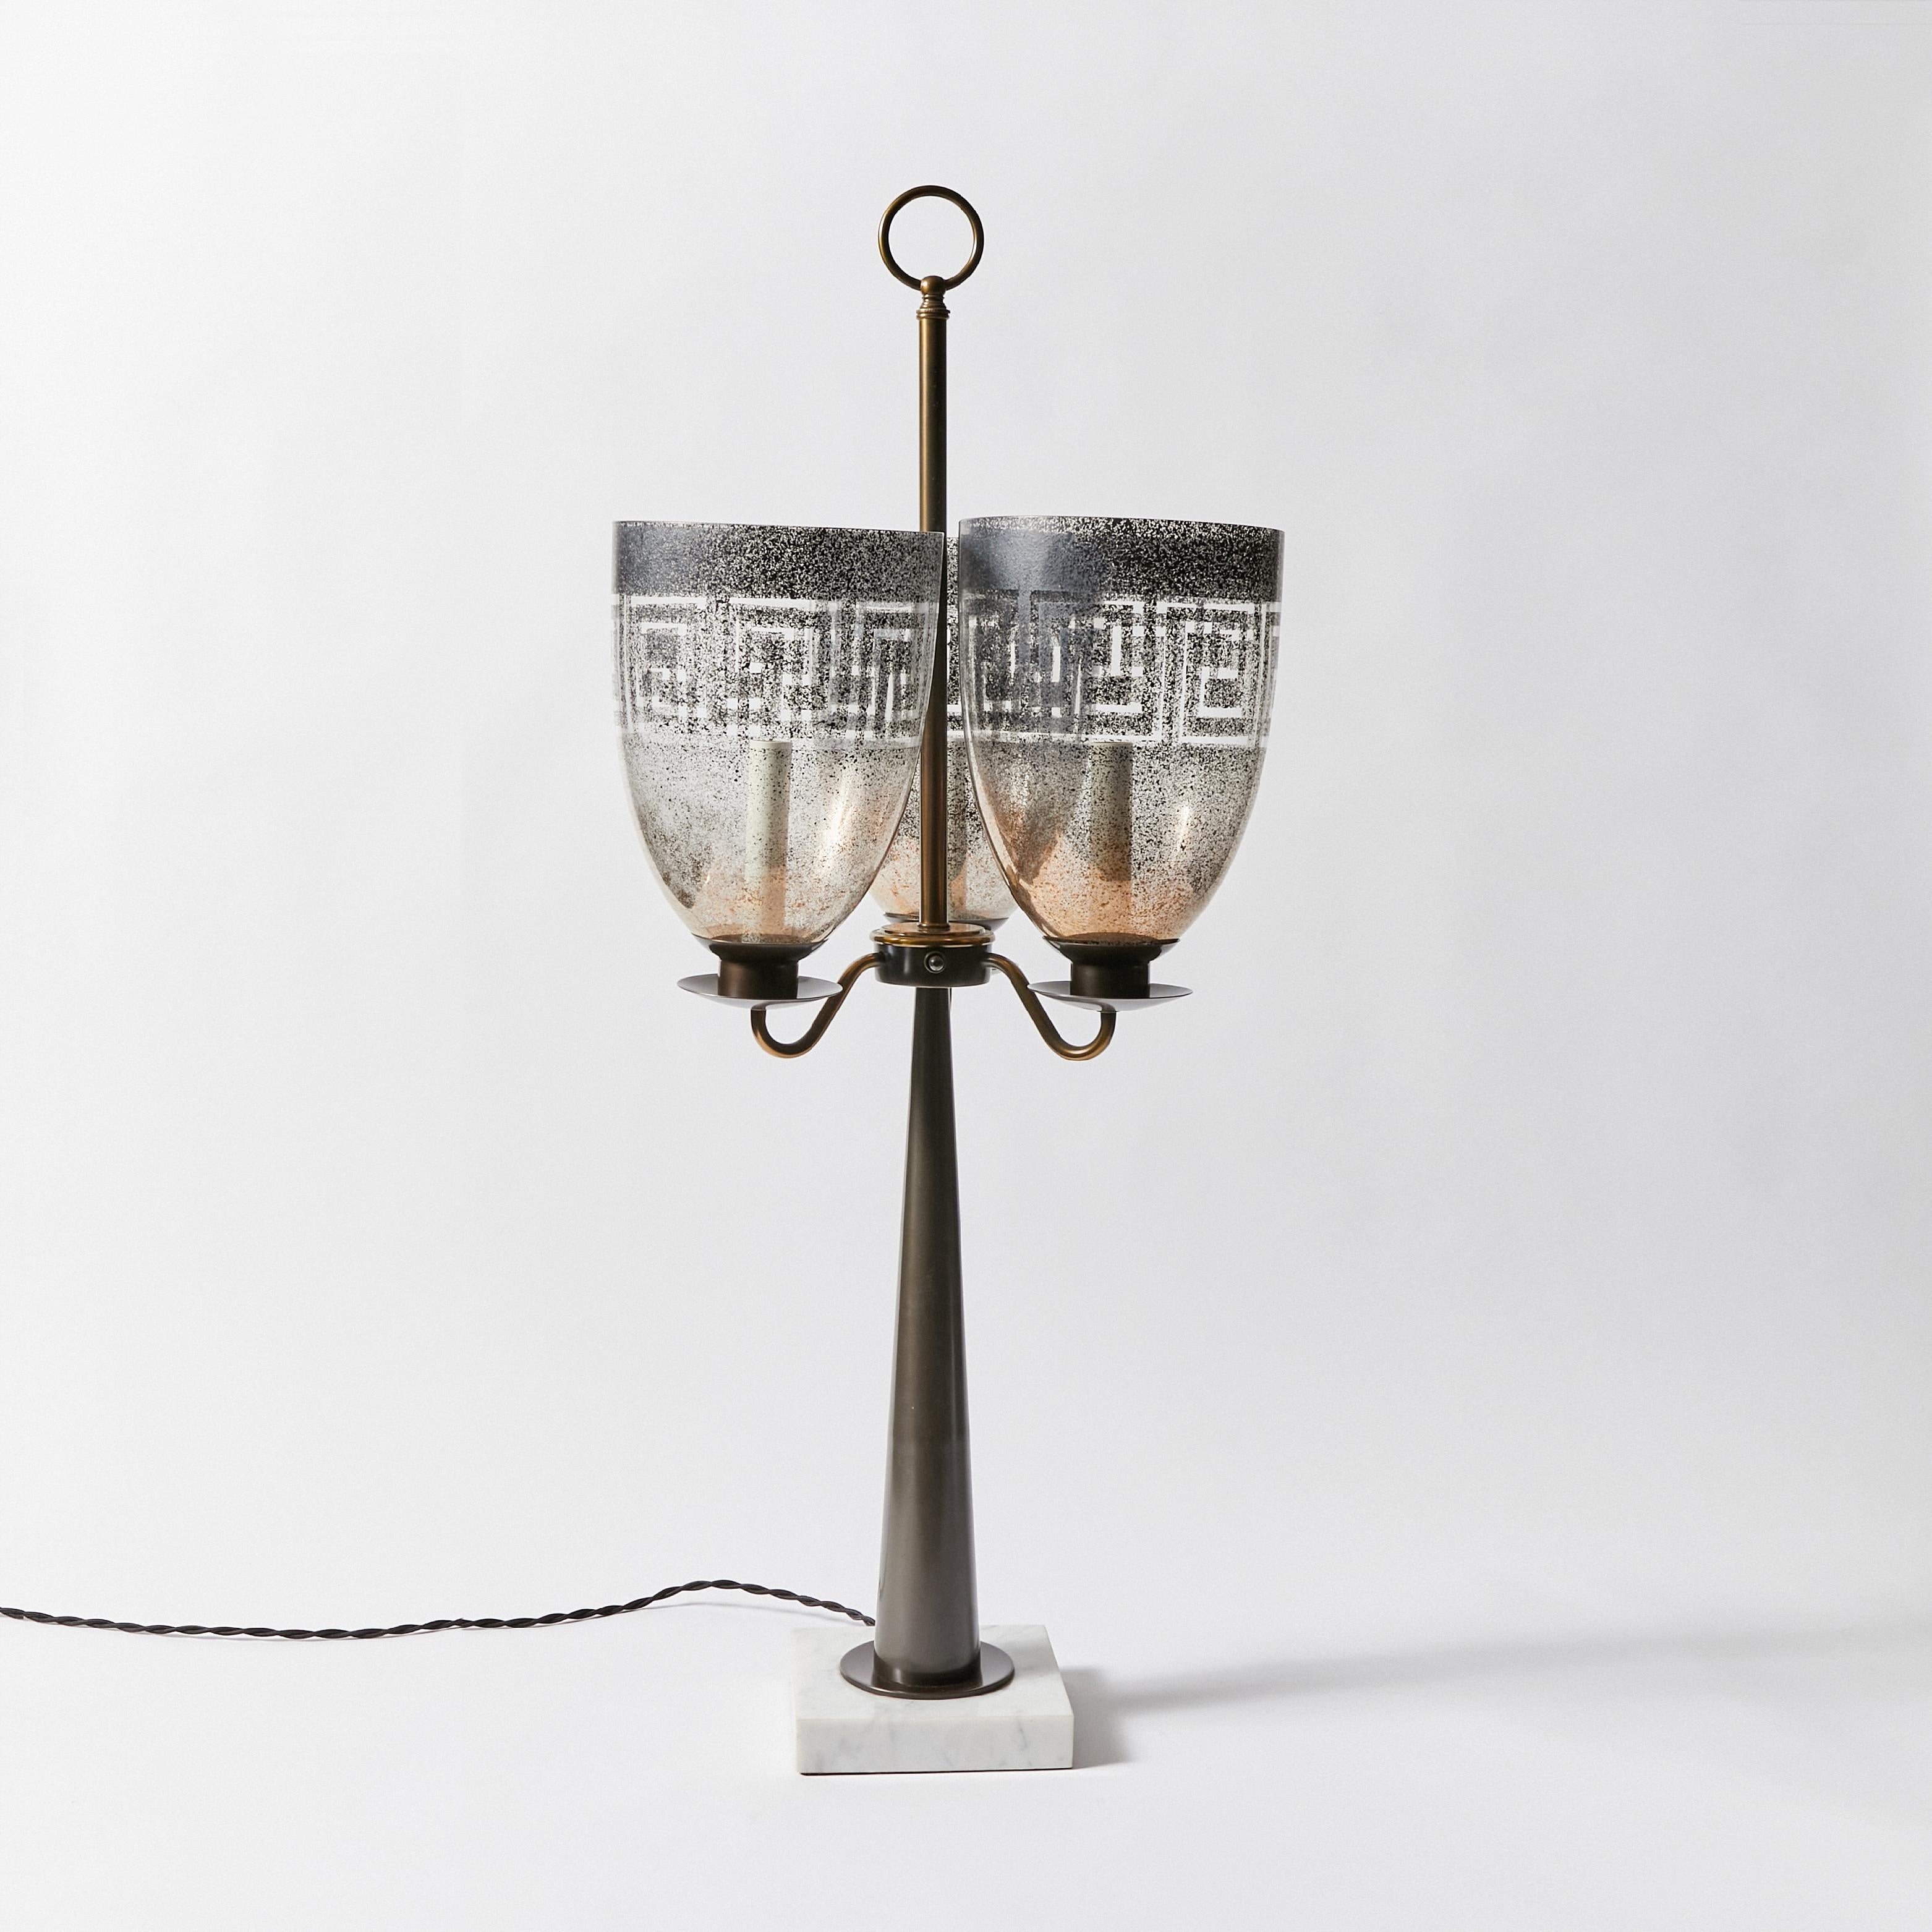 Triple hurricane shade candlestick table lamp in the manner of Tommi Parzinger. Made by Stiffel. This item has been refinished in Antique Bronze and rewired with braided cloth cord and new hardware. This lamp does not include shade or harp.